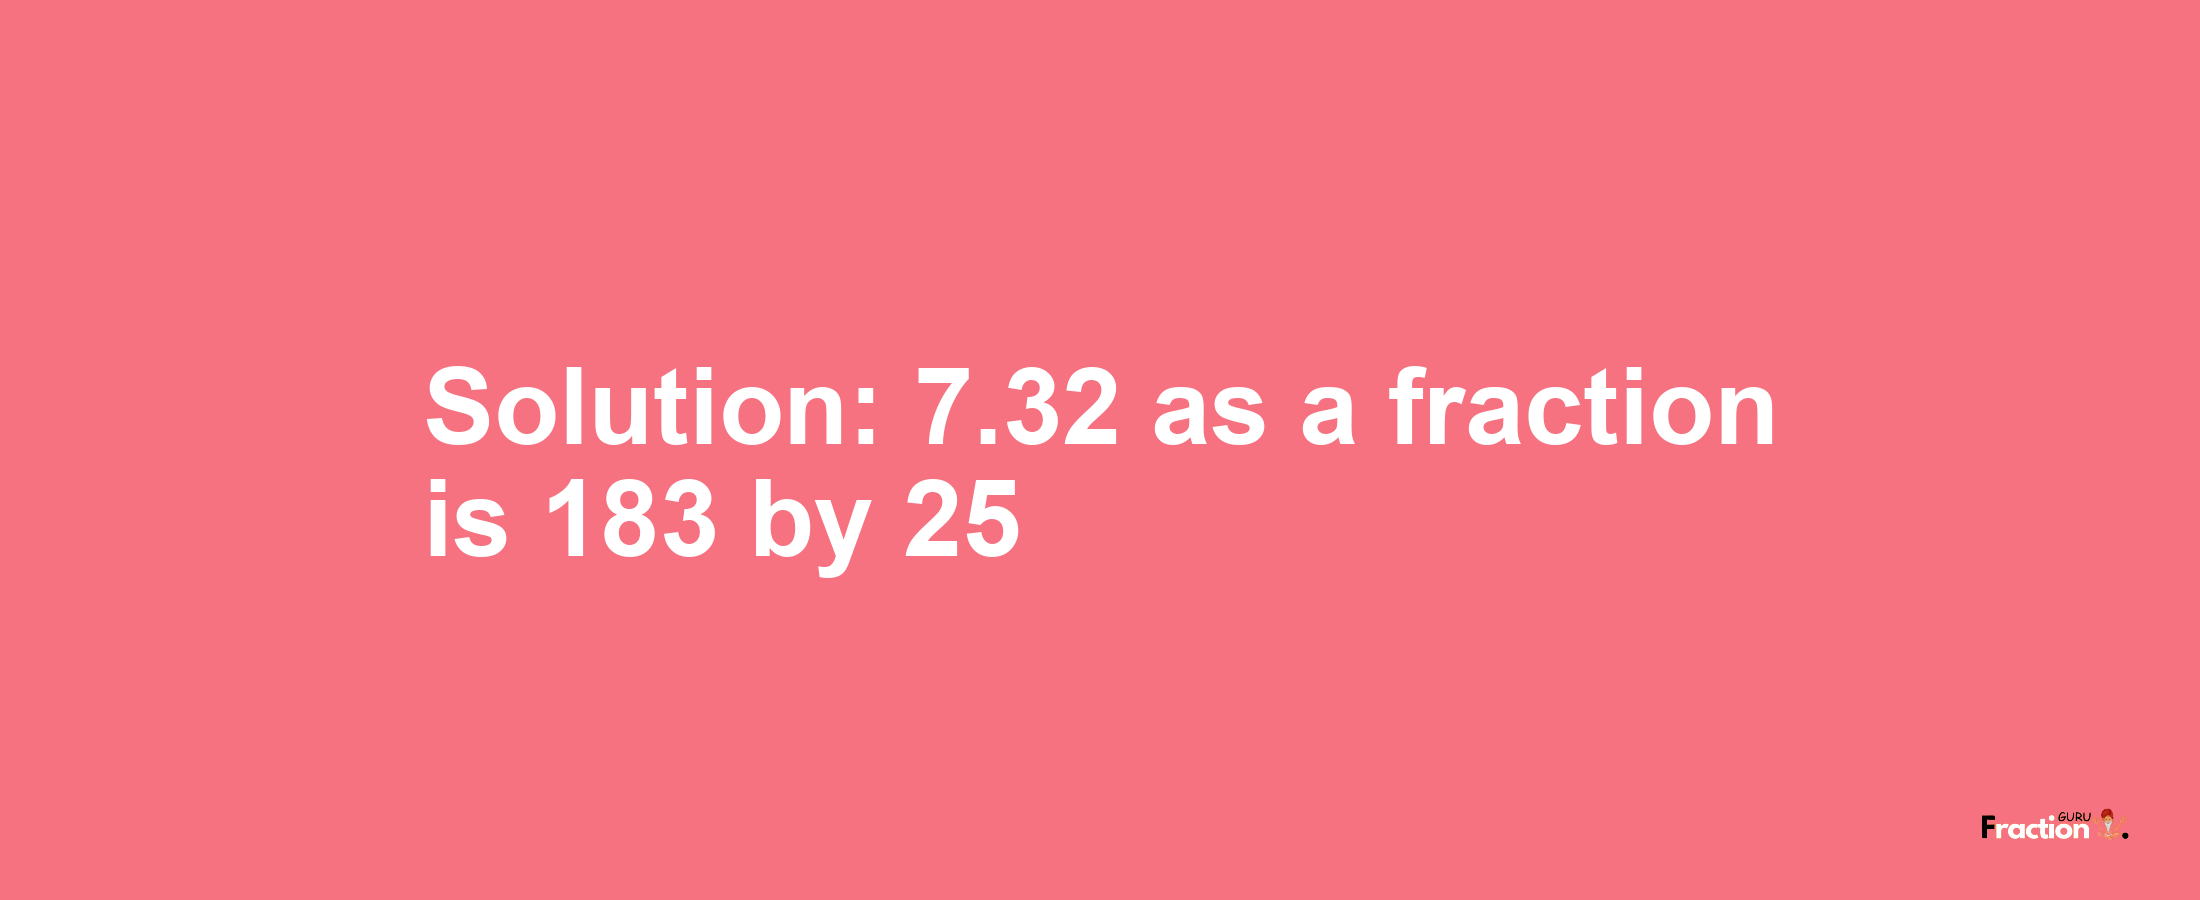 Solution:7.32 as a fraction is 183/25